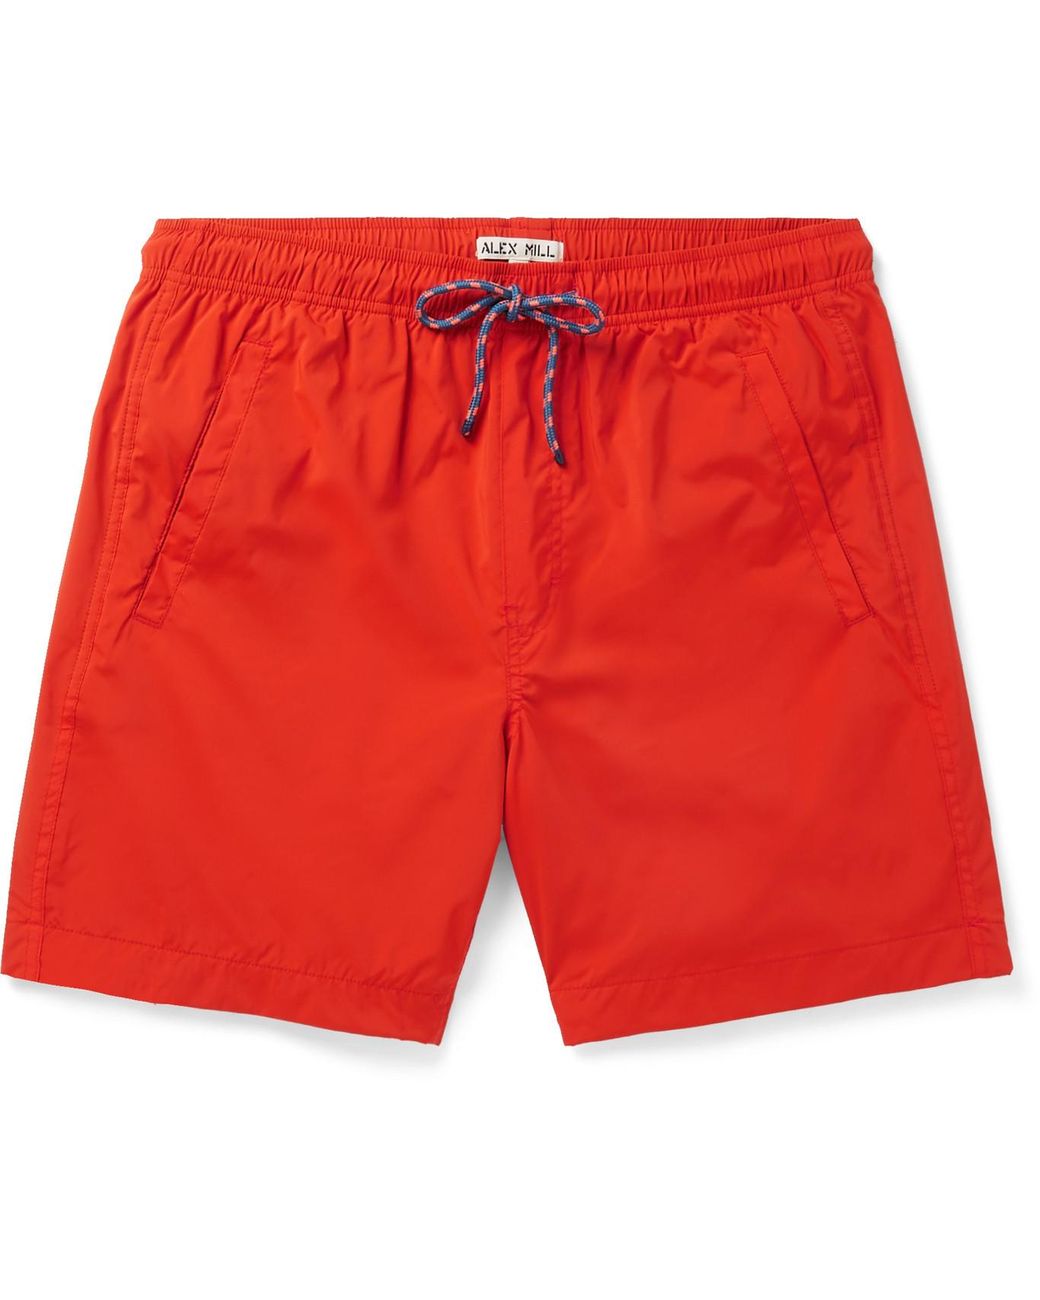 Alex Mill Shell Drawstring Shorts in Red for Men - Lyst